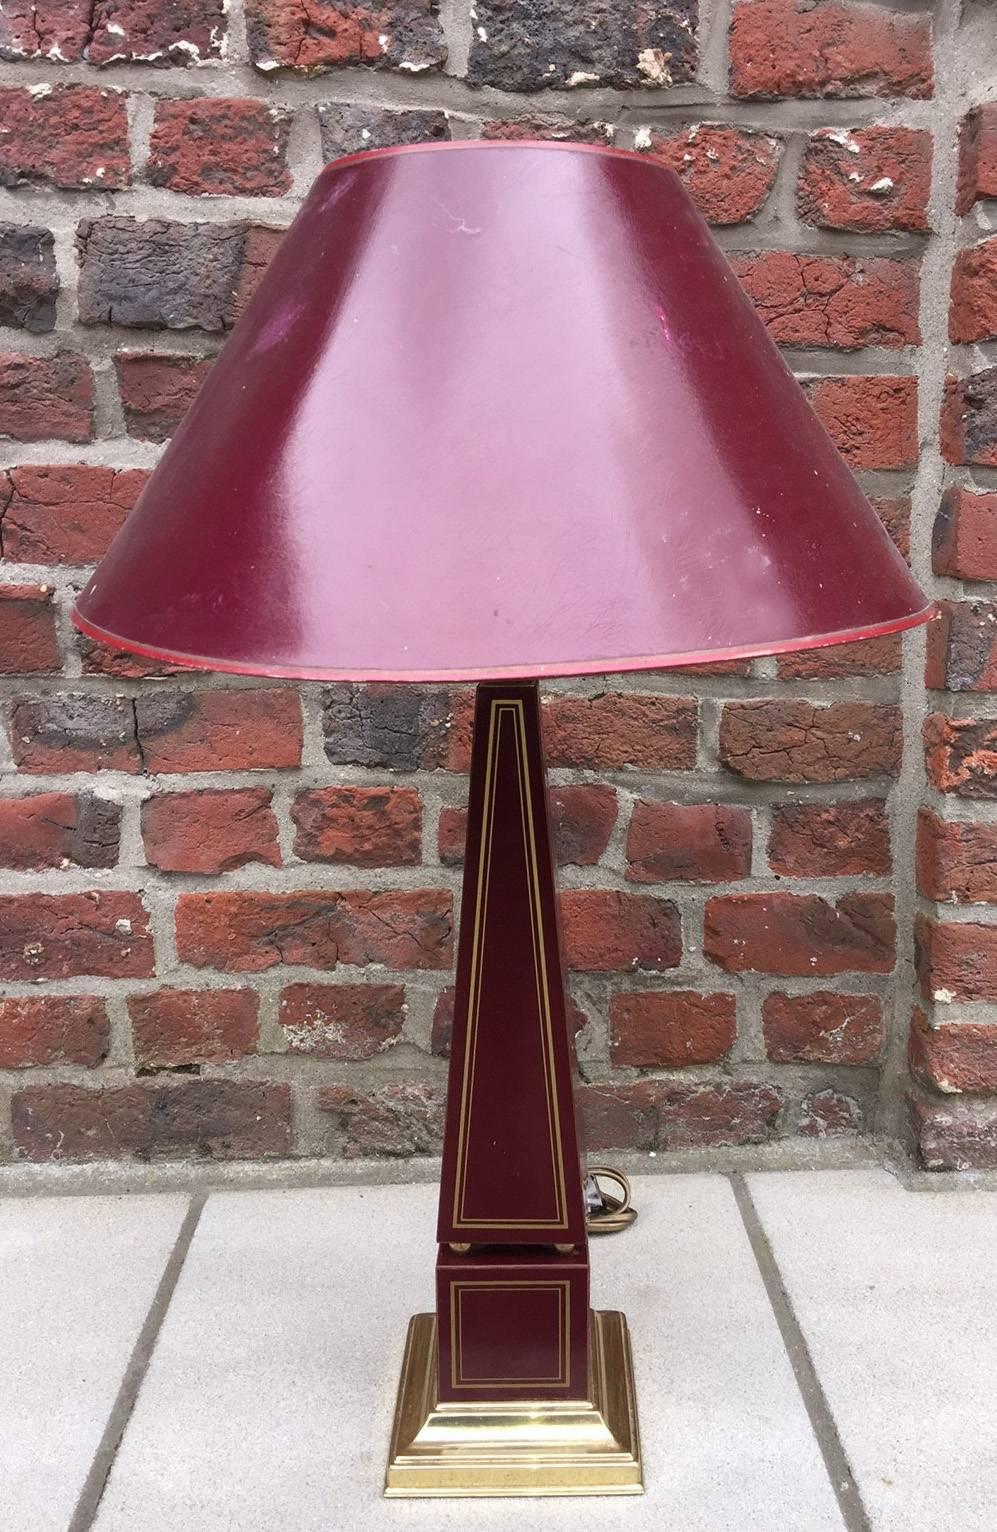 two lacquered obelisk table lamps, circa 1970.
Shades to change.
(one is sold)